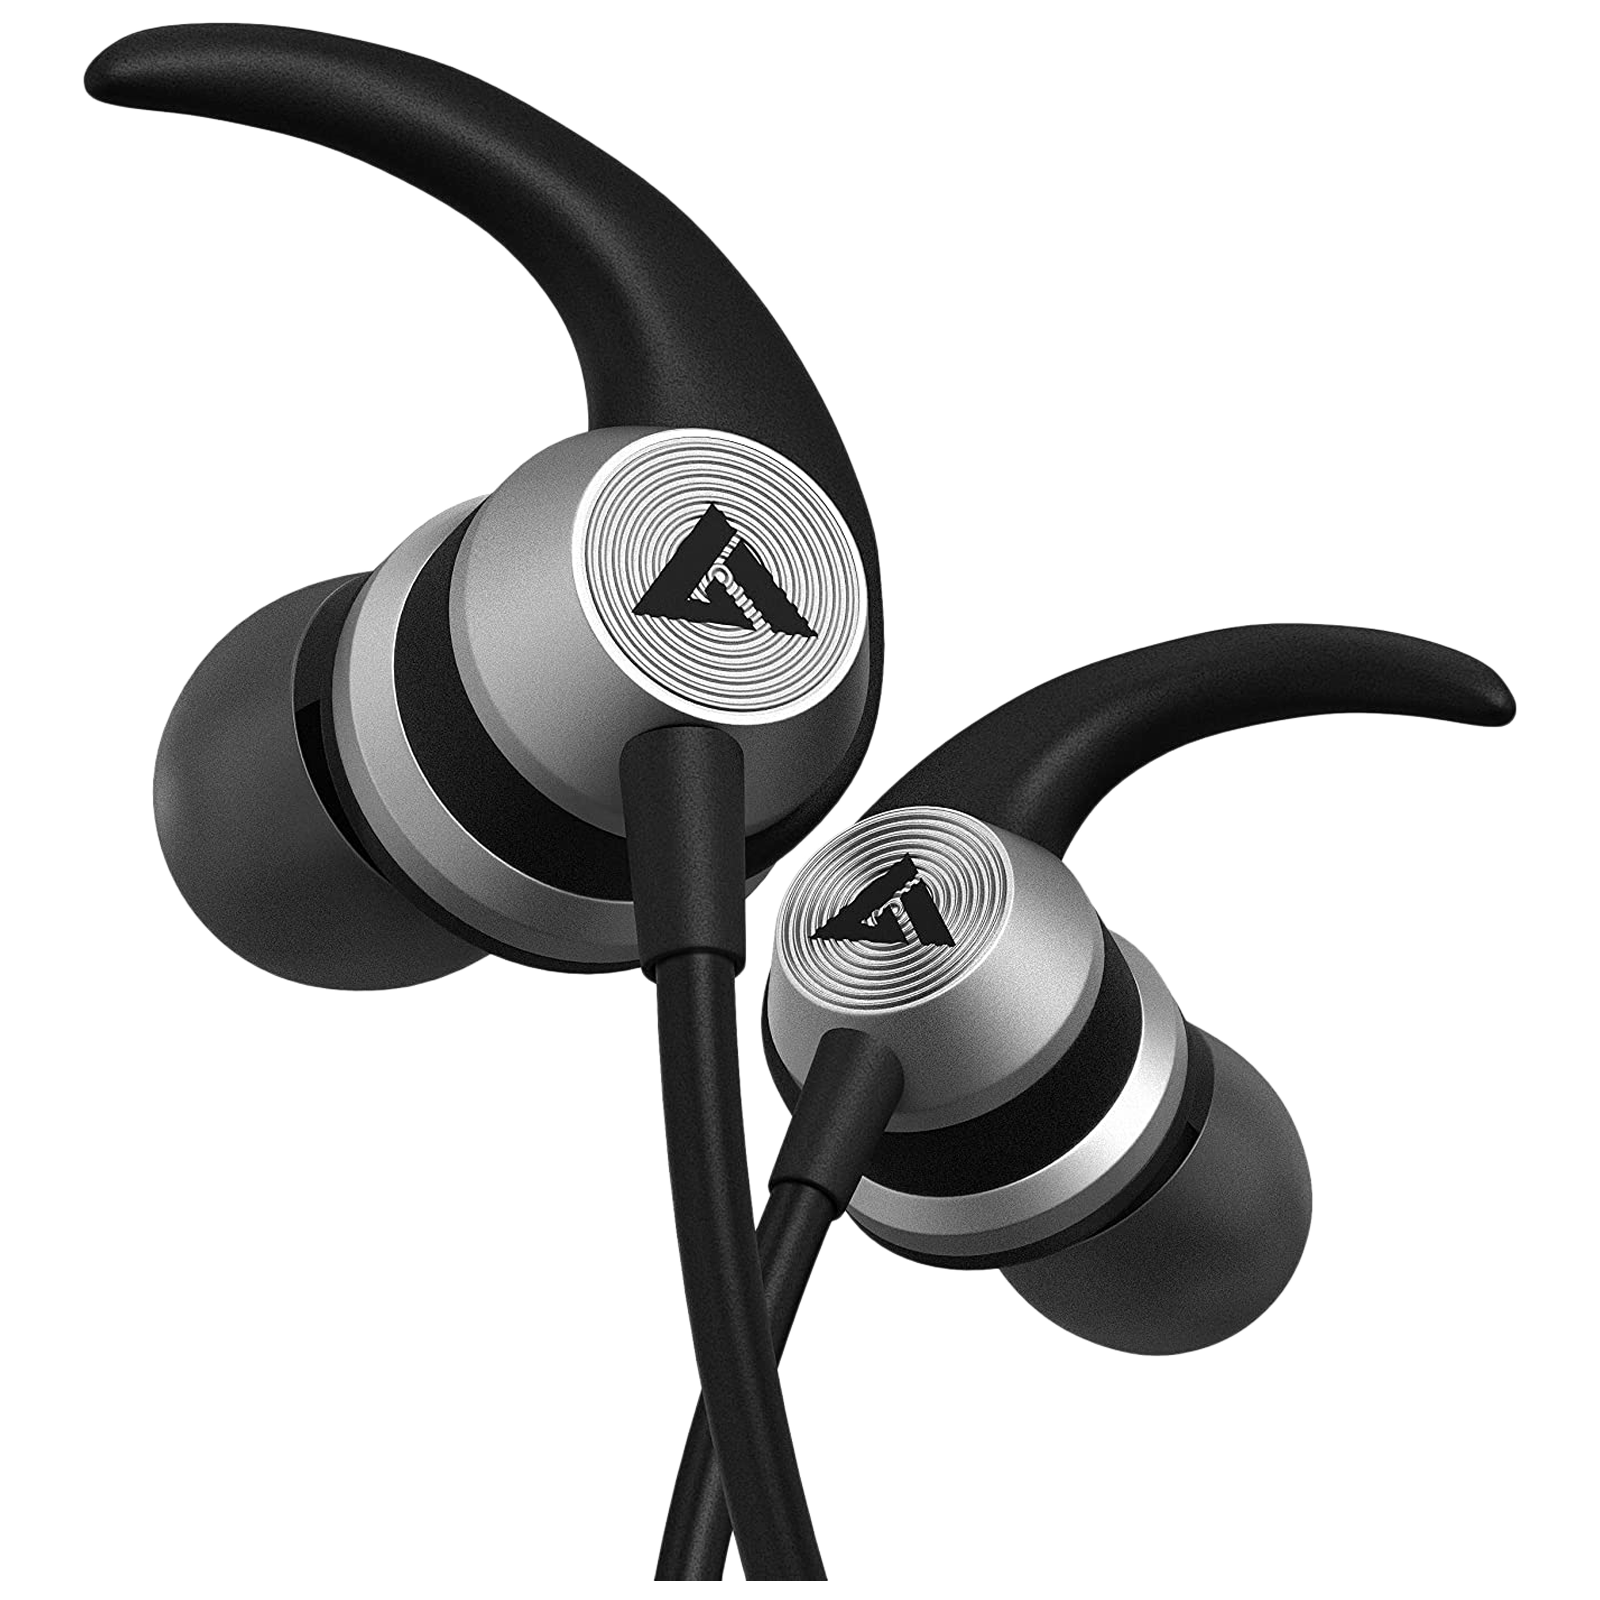 Buy Boult Audio Bassbuds X1 BA-RD-X1 In-Ear Wired Earphone with